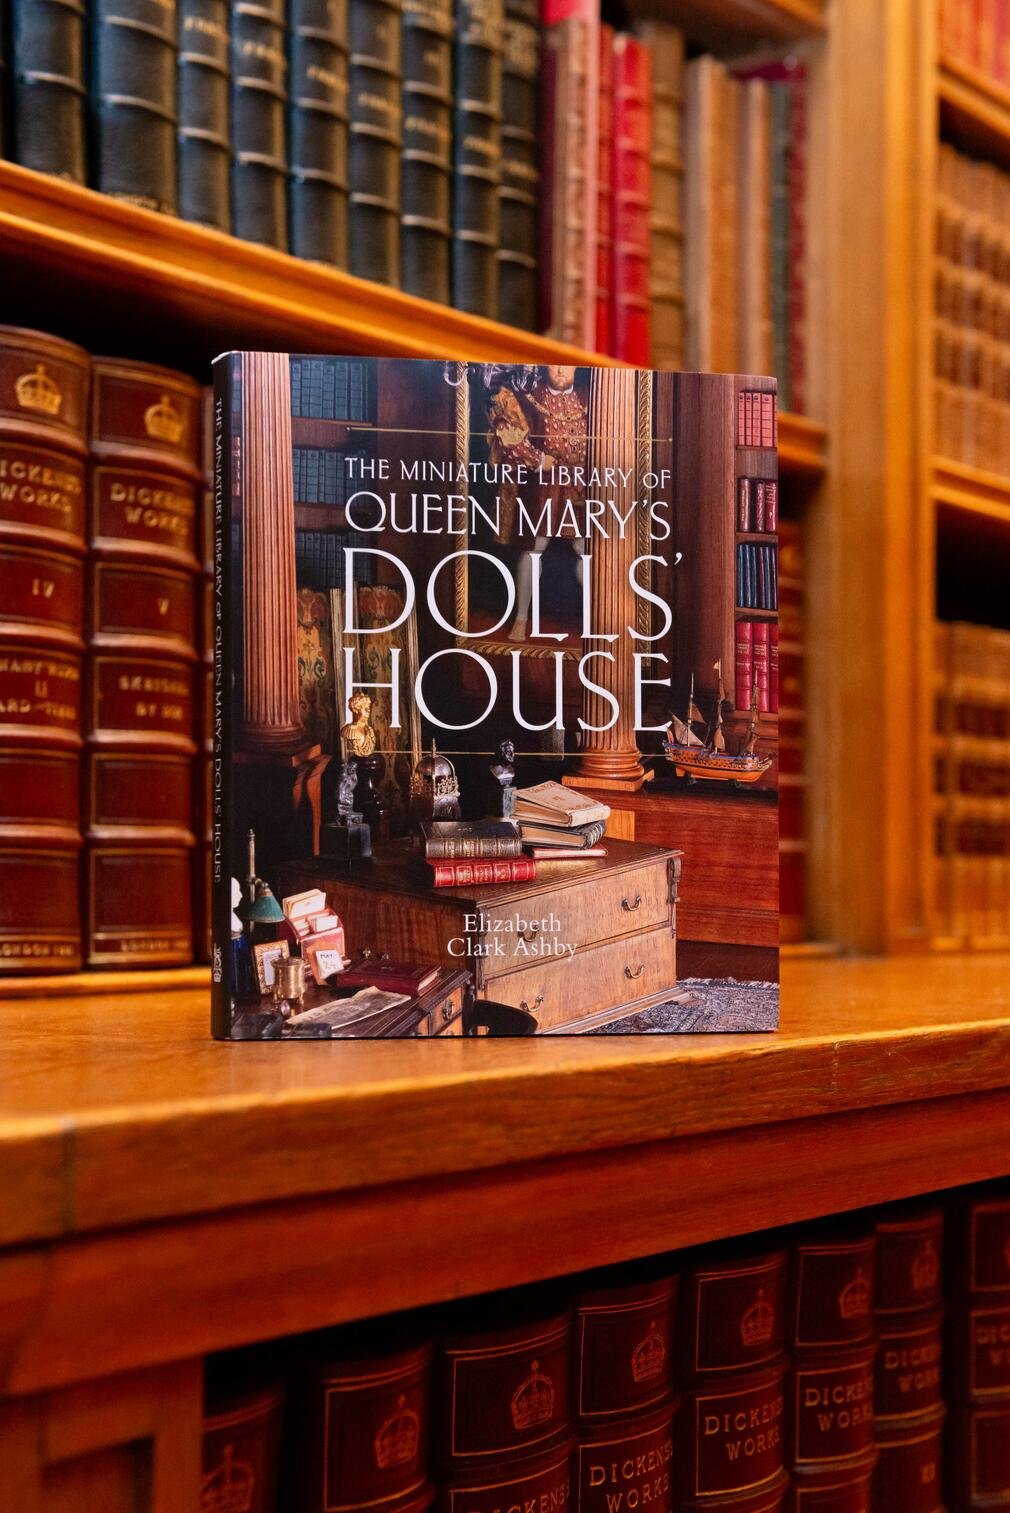 The new book The Miniature Library of Queen Mary's Dolls' House photographed in the miniature library